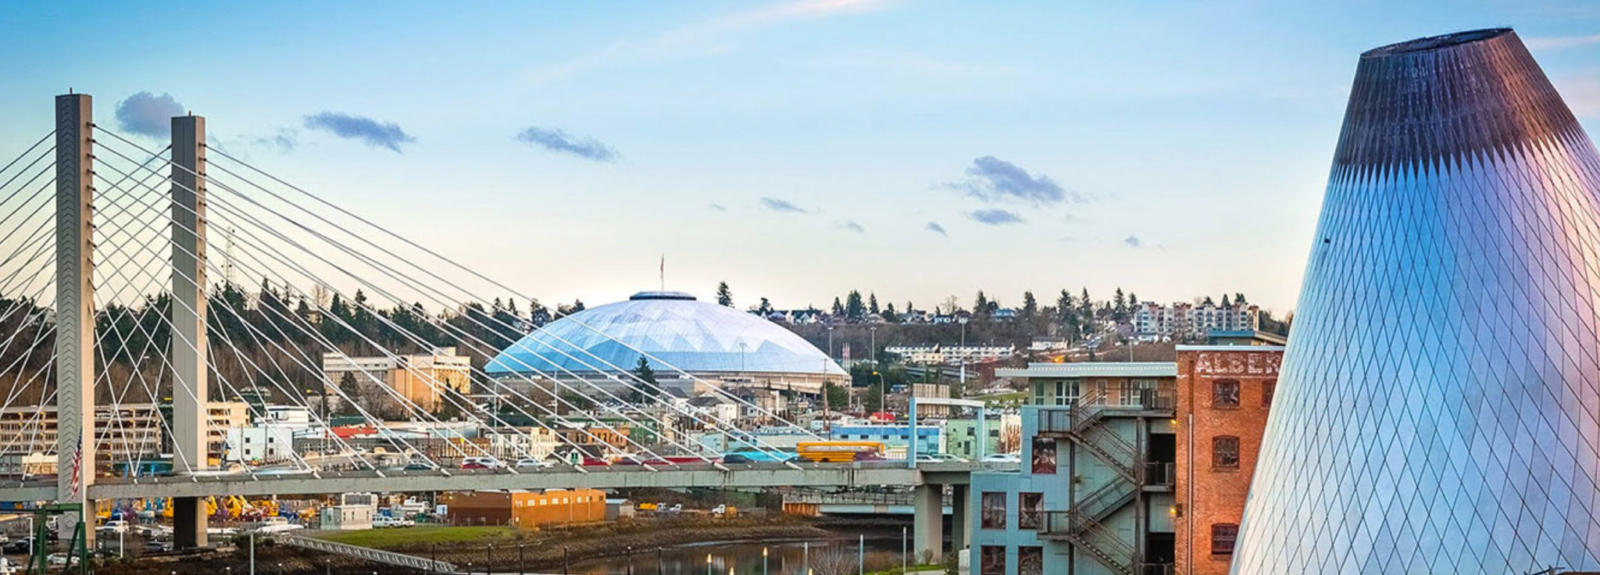 Website development placeholder image of downtown Tacoma